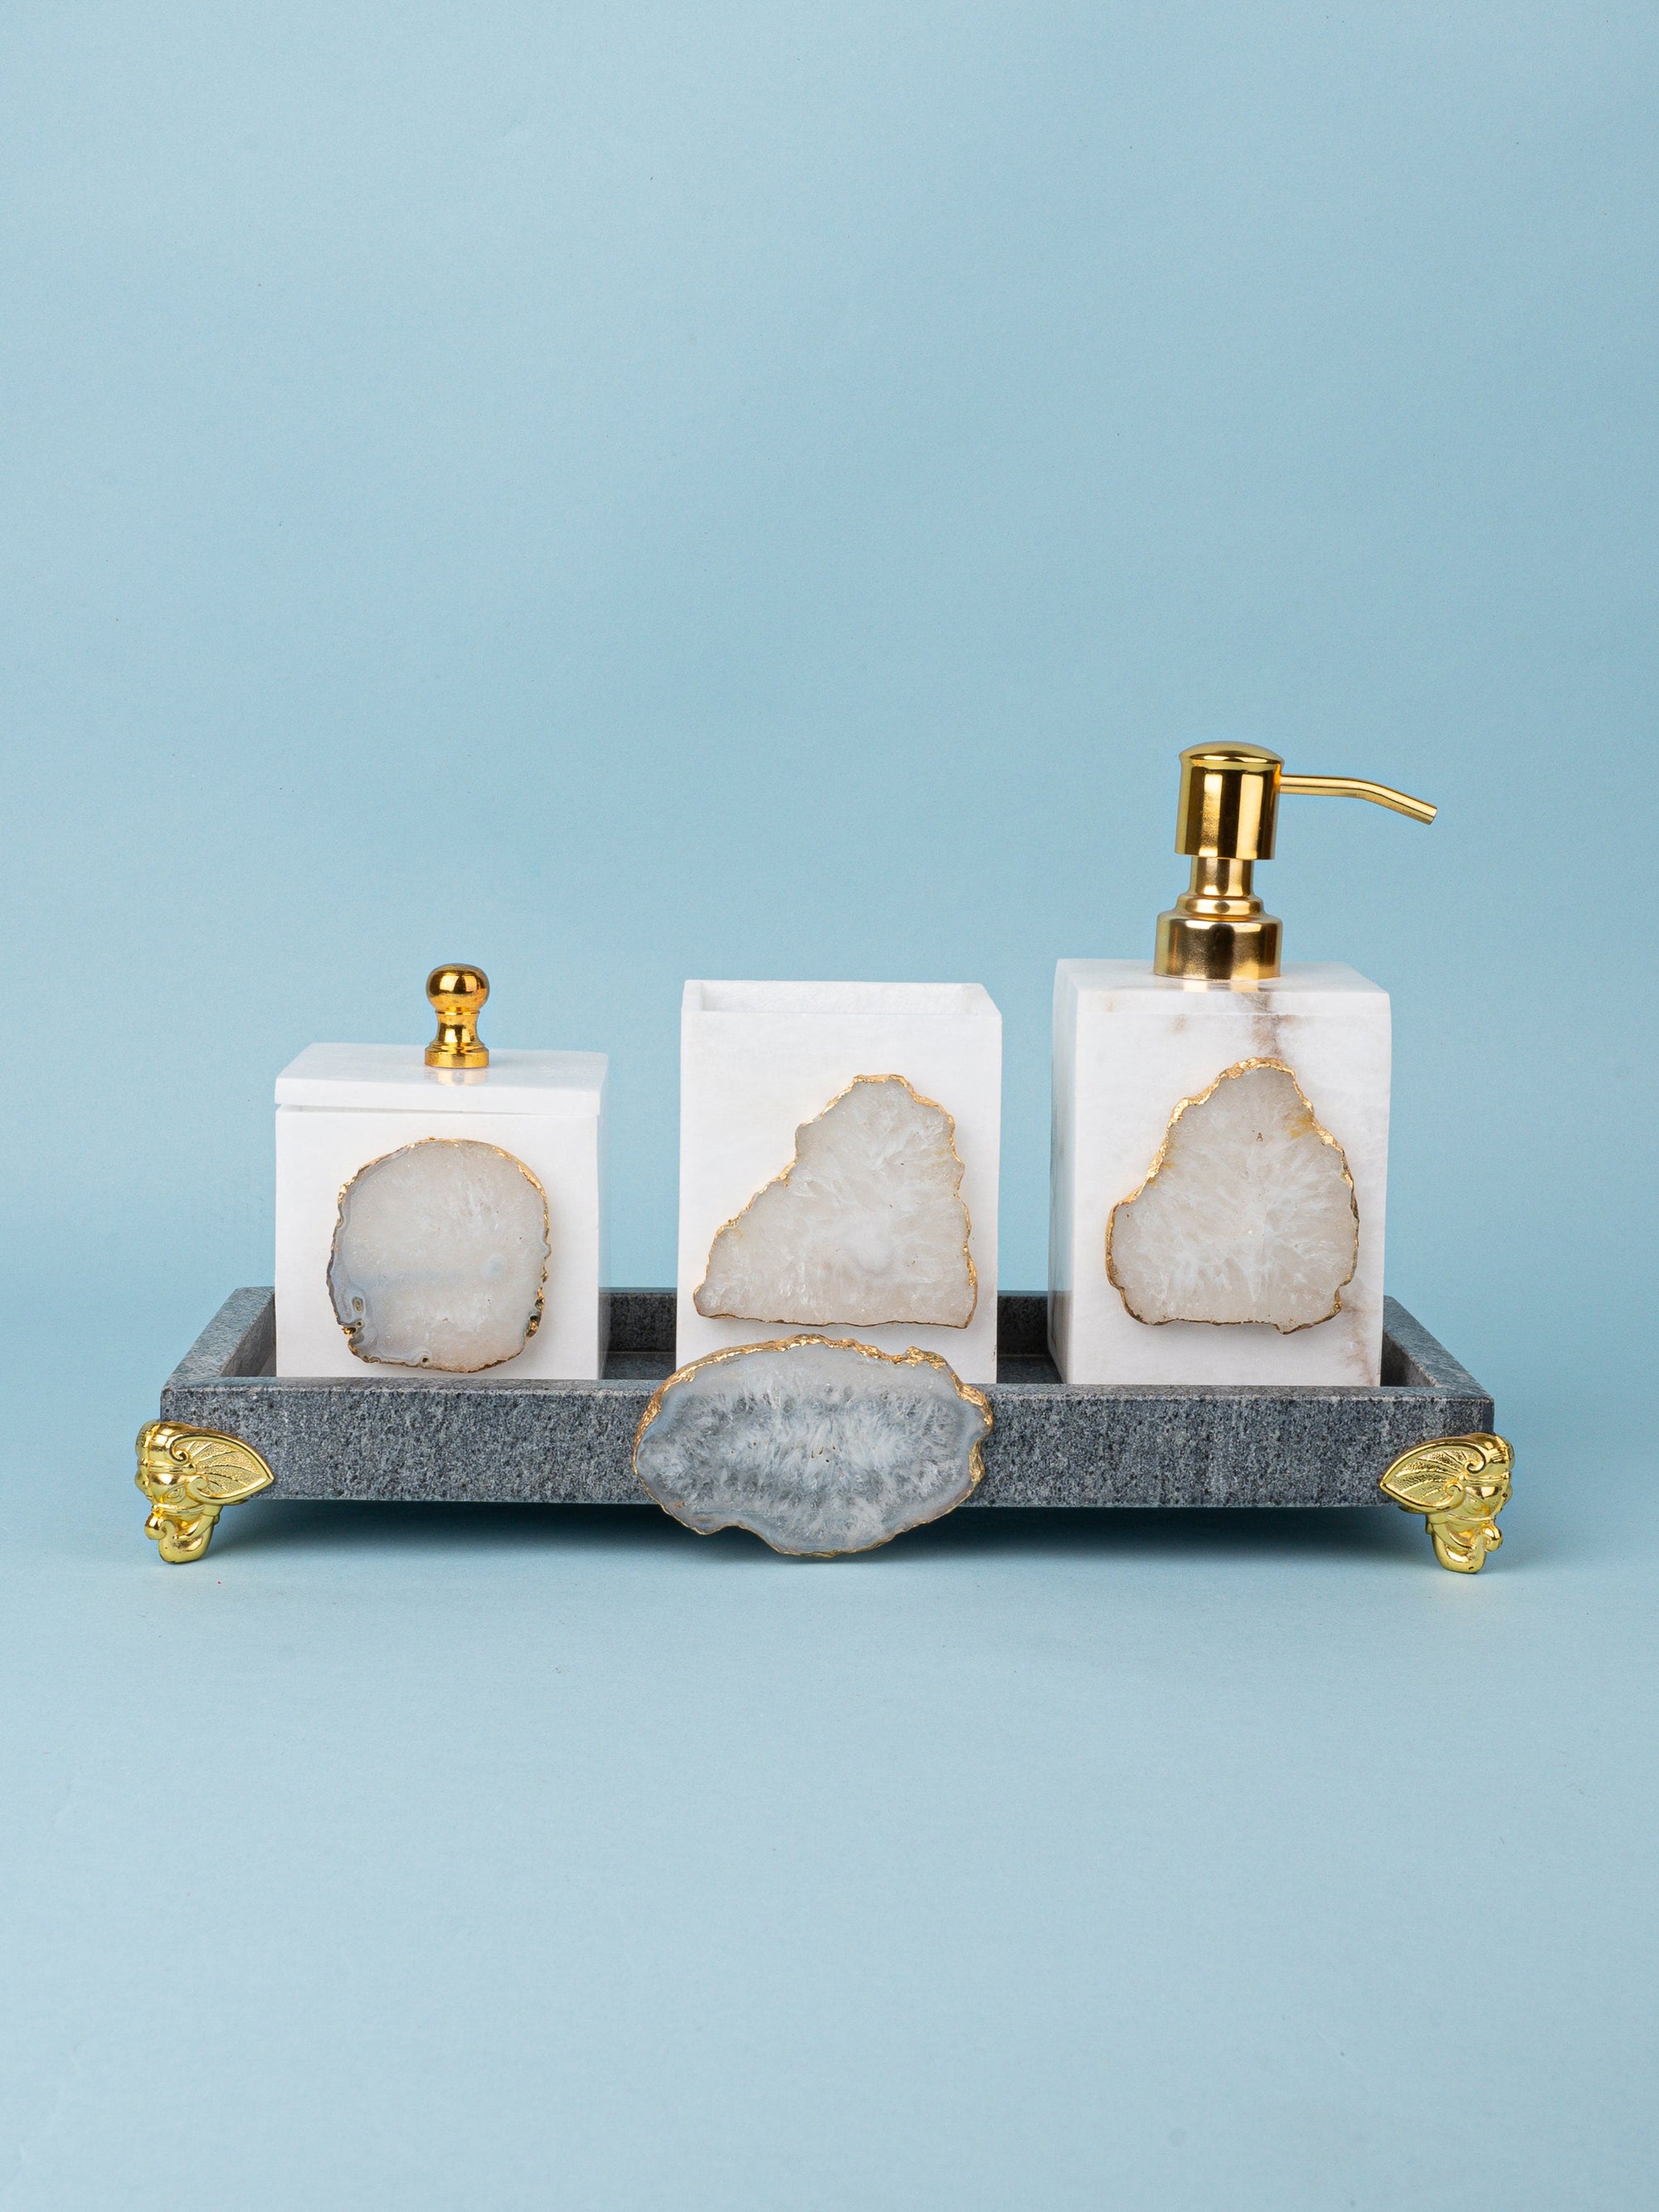 4 Pieces Bathroom Accessories Set with Agate Stone Decor